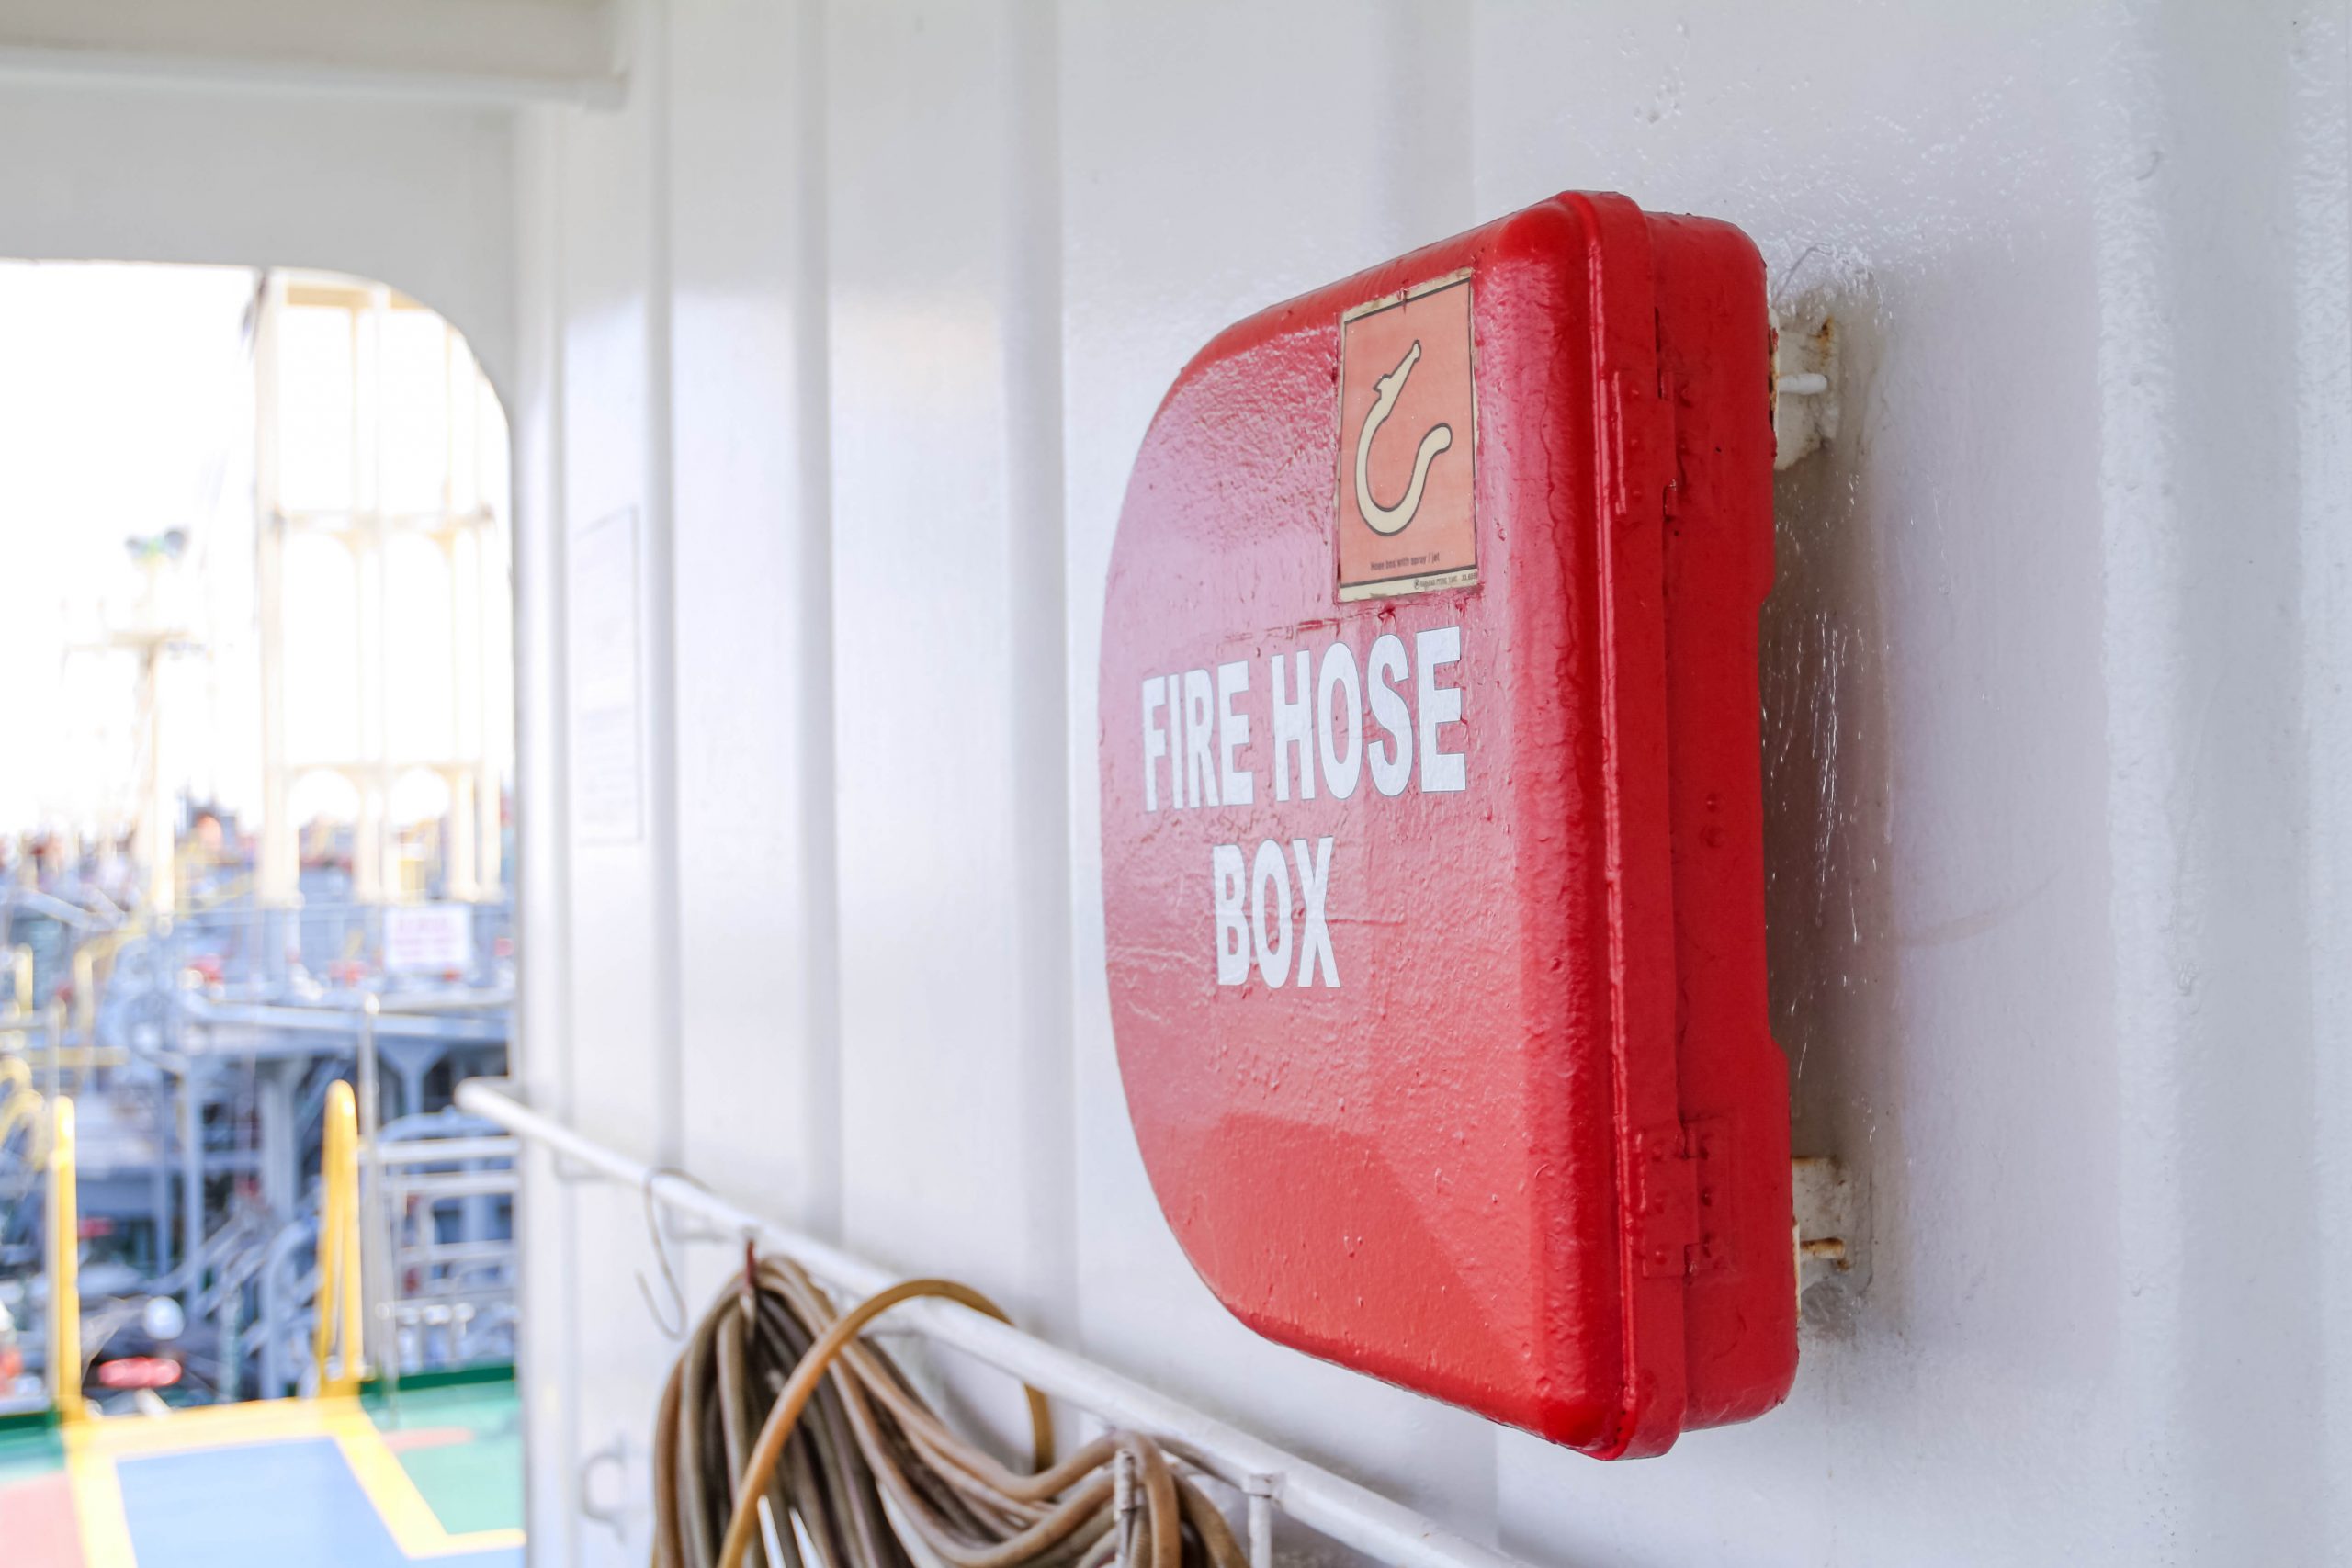 Red fire hose box on focus photo